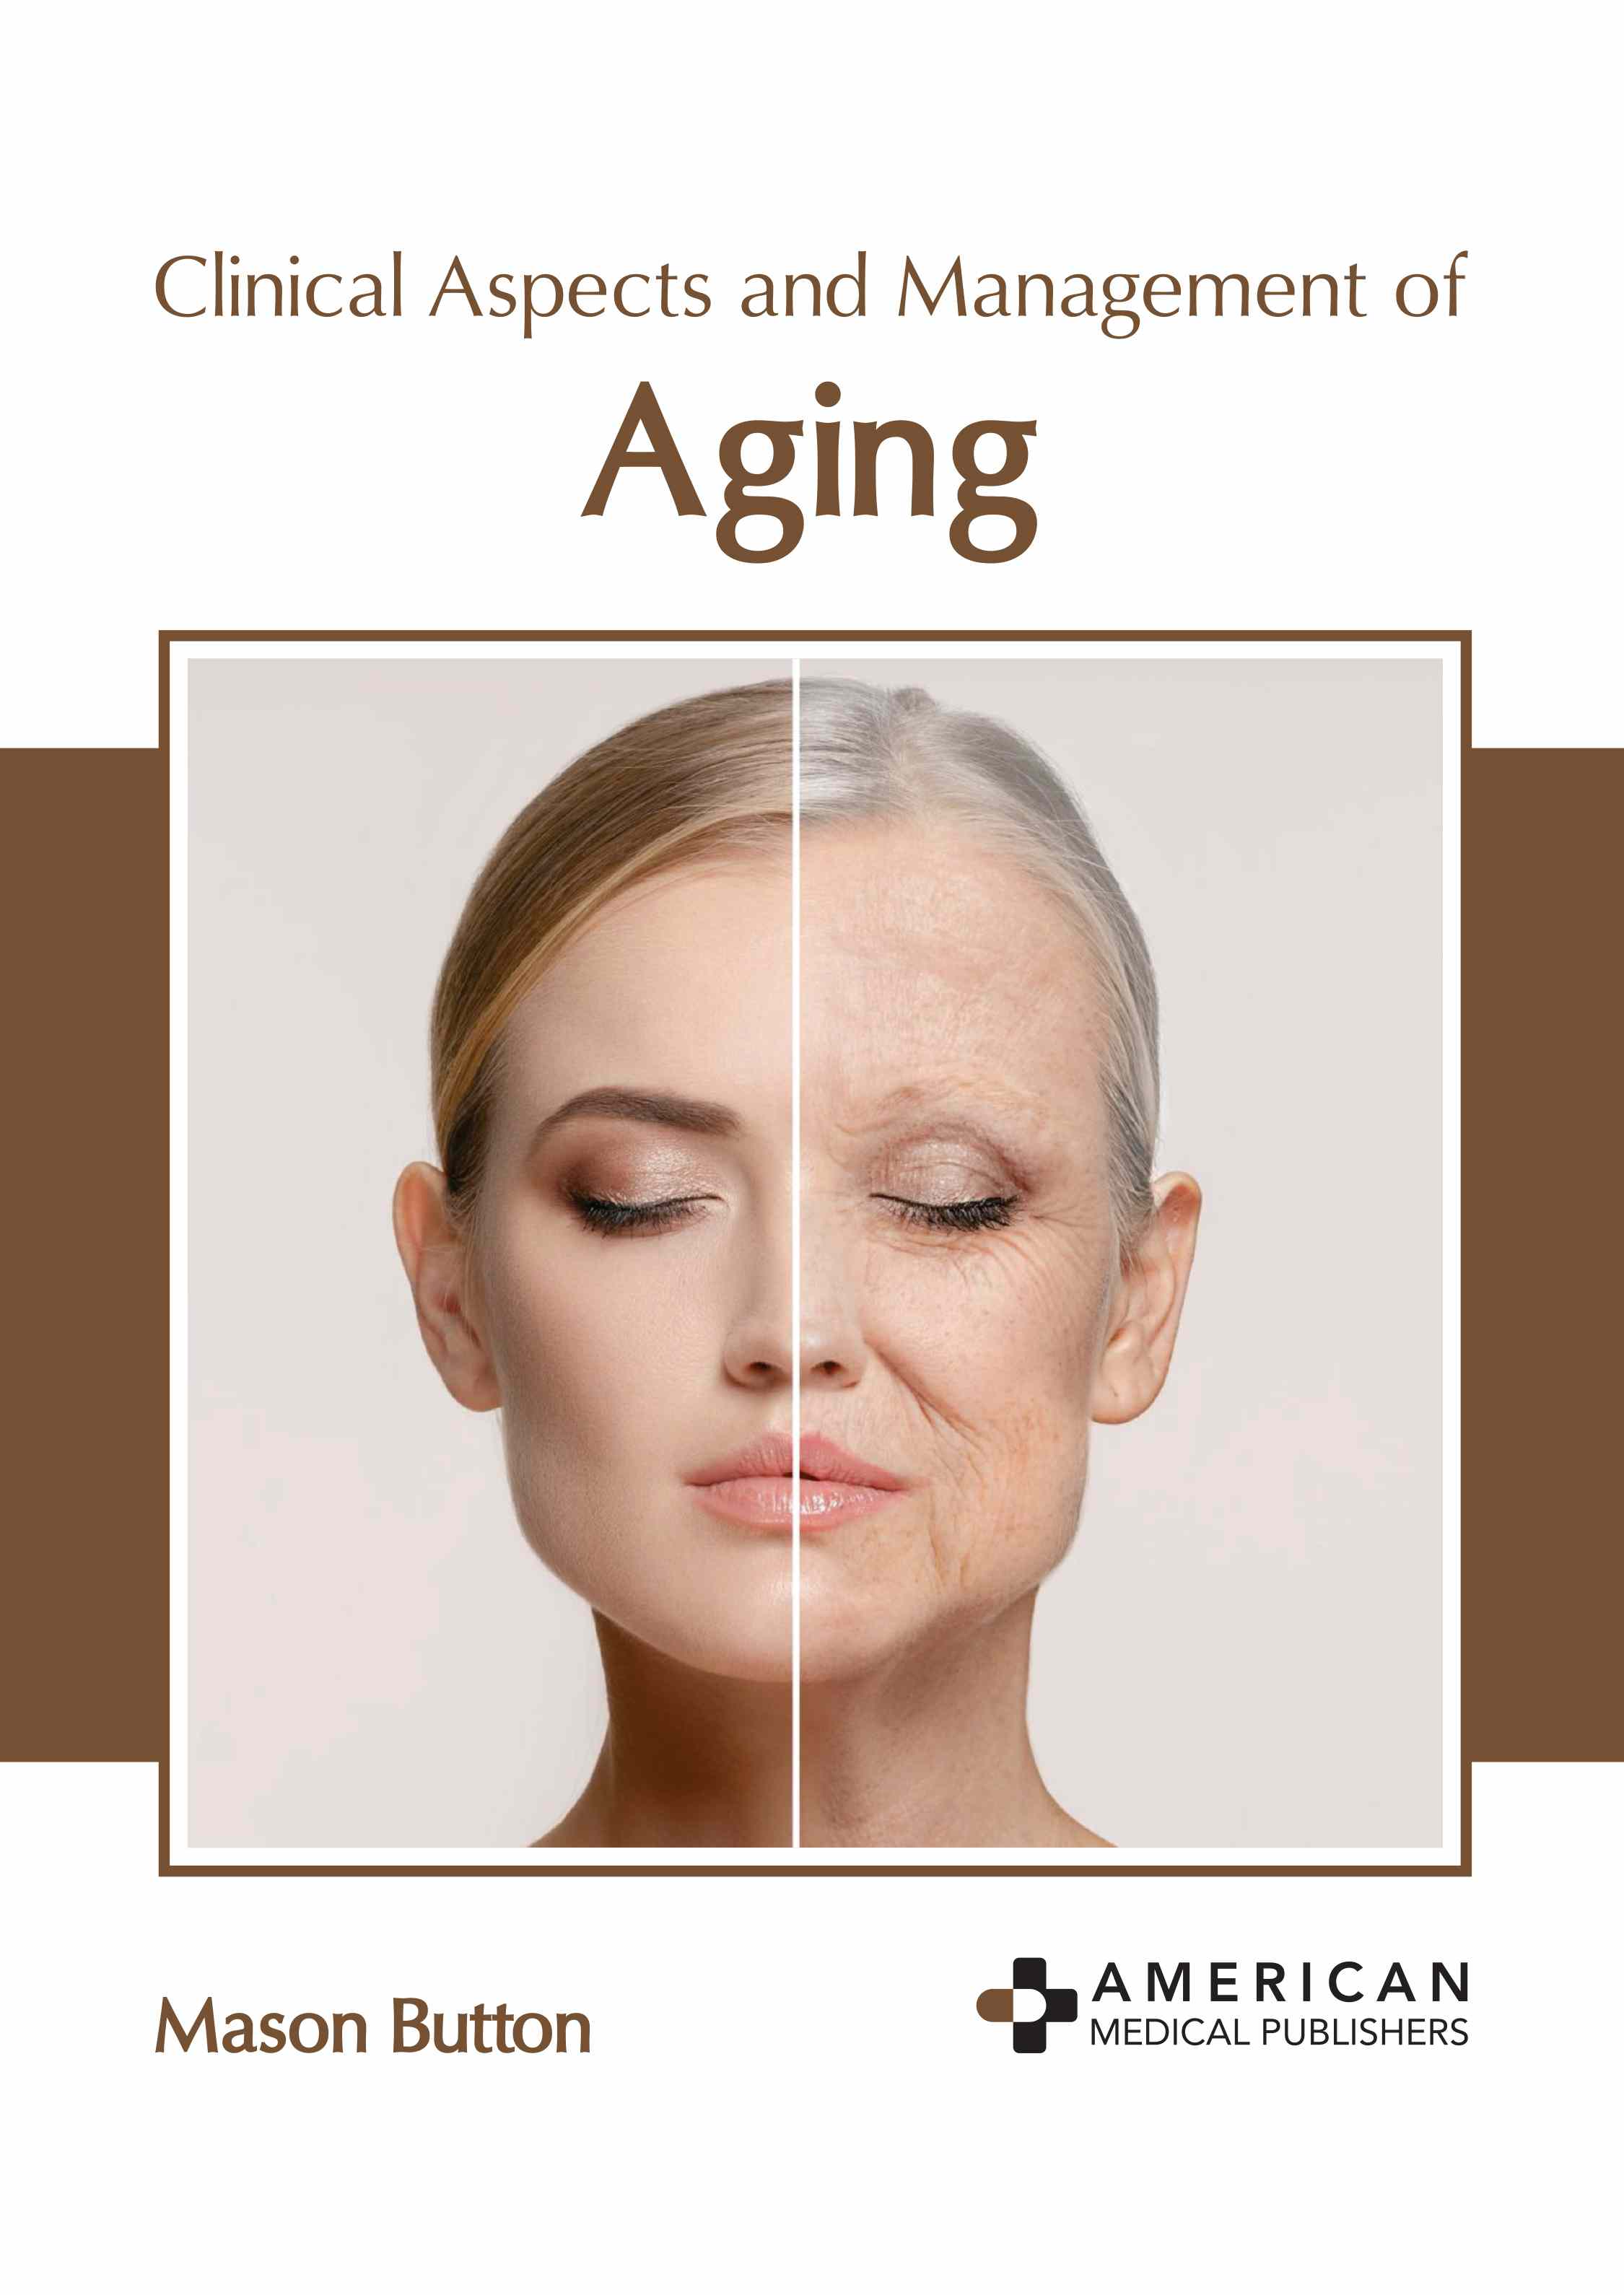 

exclusive-publishers/american-medical-publishers/clinical-aspects-and-management-of-aging-9781639275816